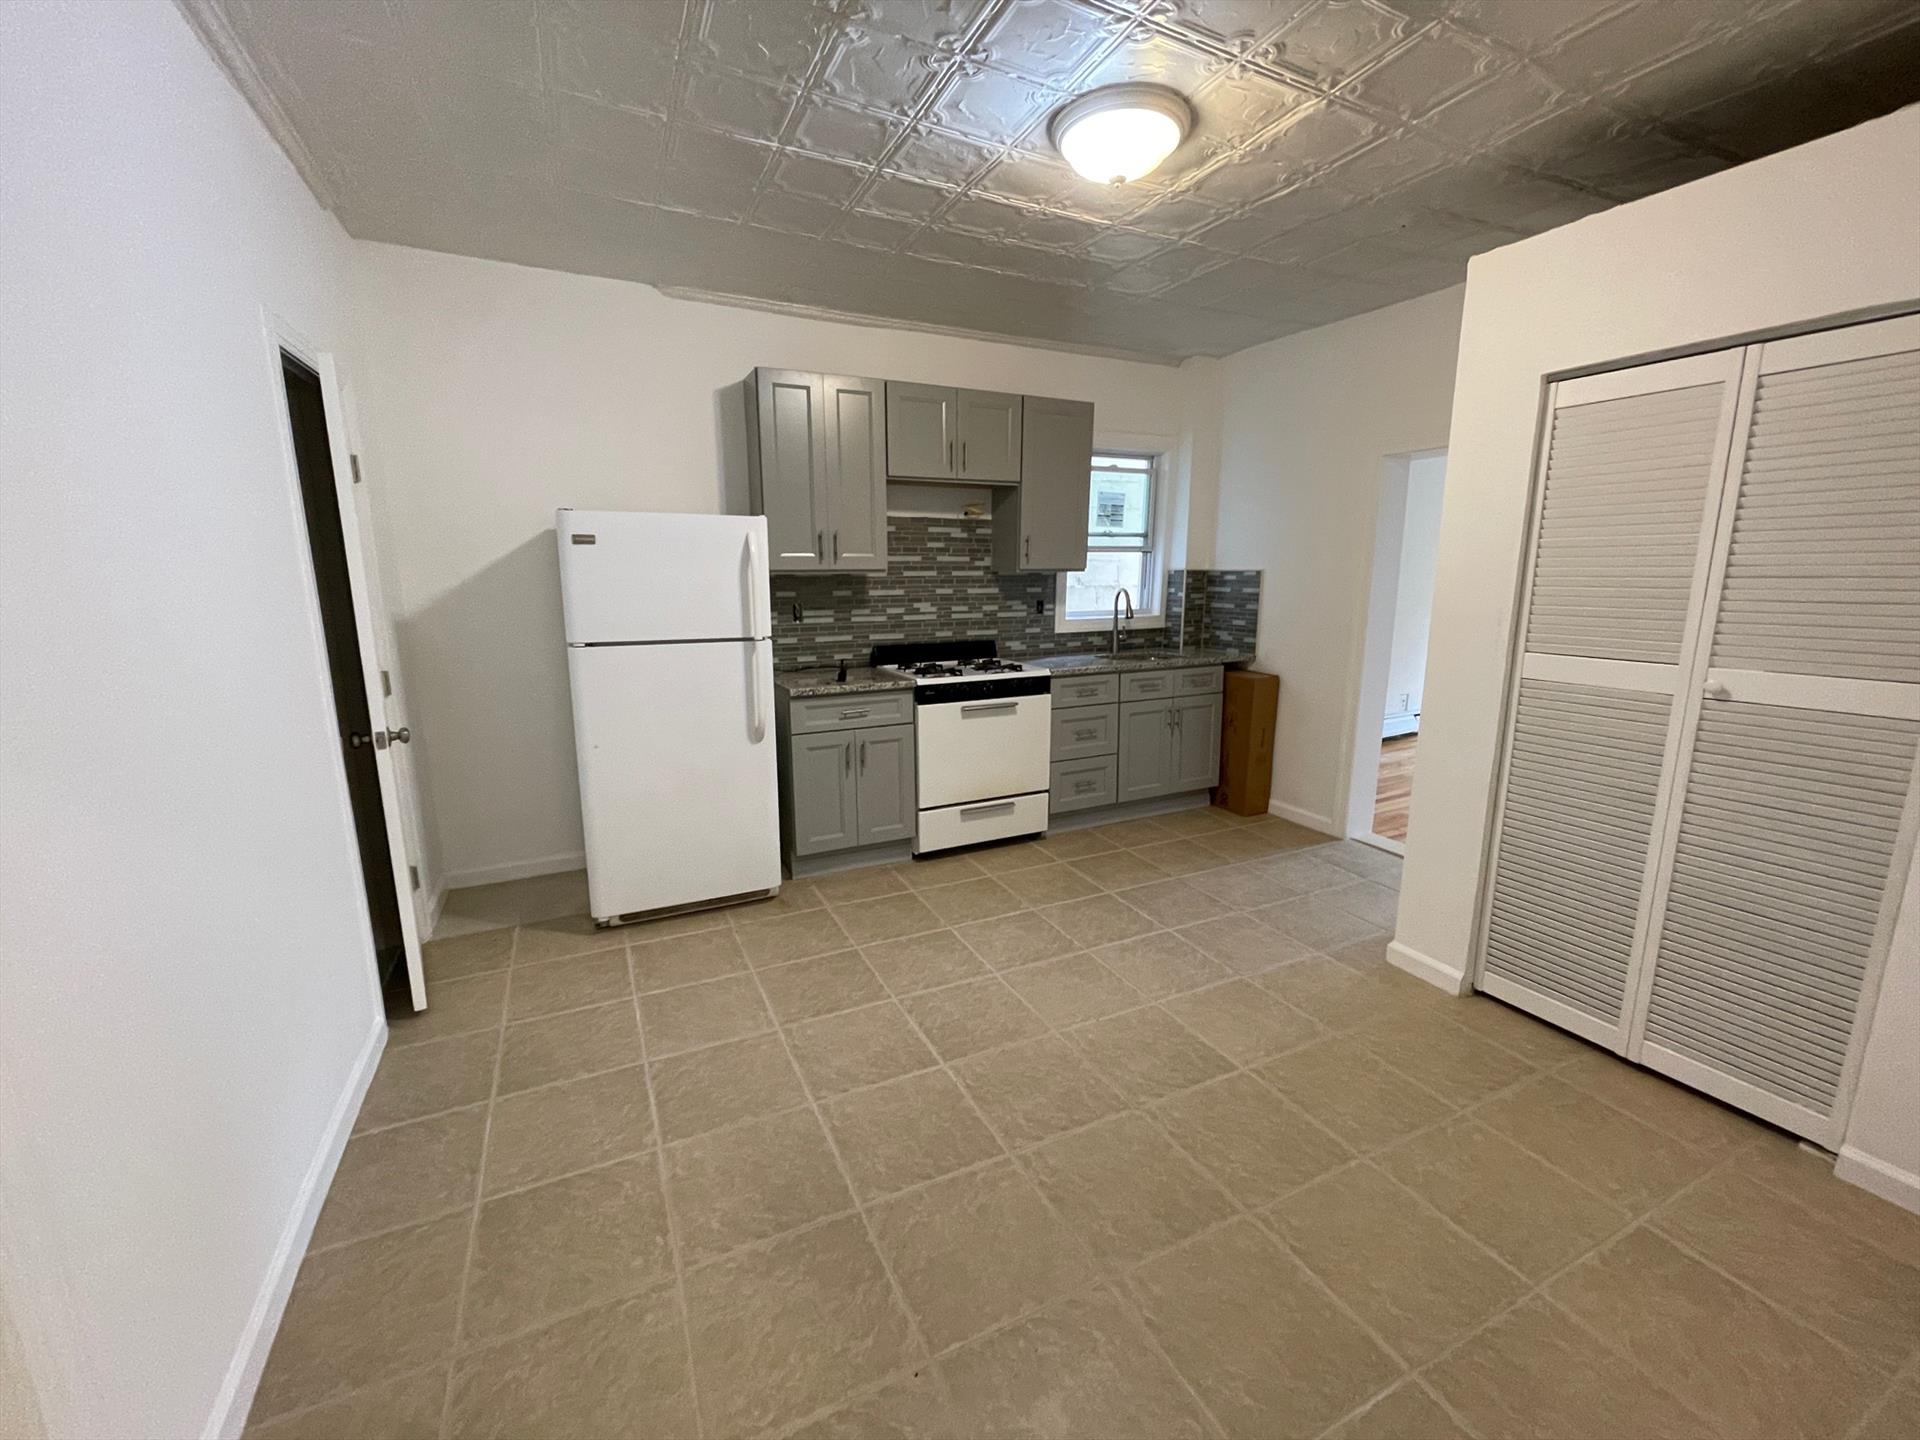 Great newly renovated 1 bedroom apartment in a central location! Apartment features an enormous walk-in closet, hardwood floors, & a newly gut renovated bathroom. This home has an efficient boxy layout with dine - in kitchen and a nice sized bedroom. Available 10/20/23. Broker fee paid by tenant.